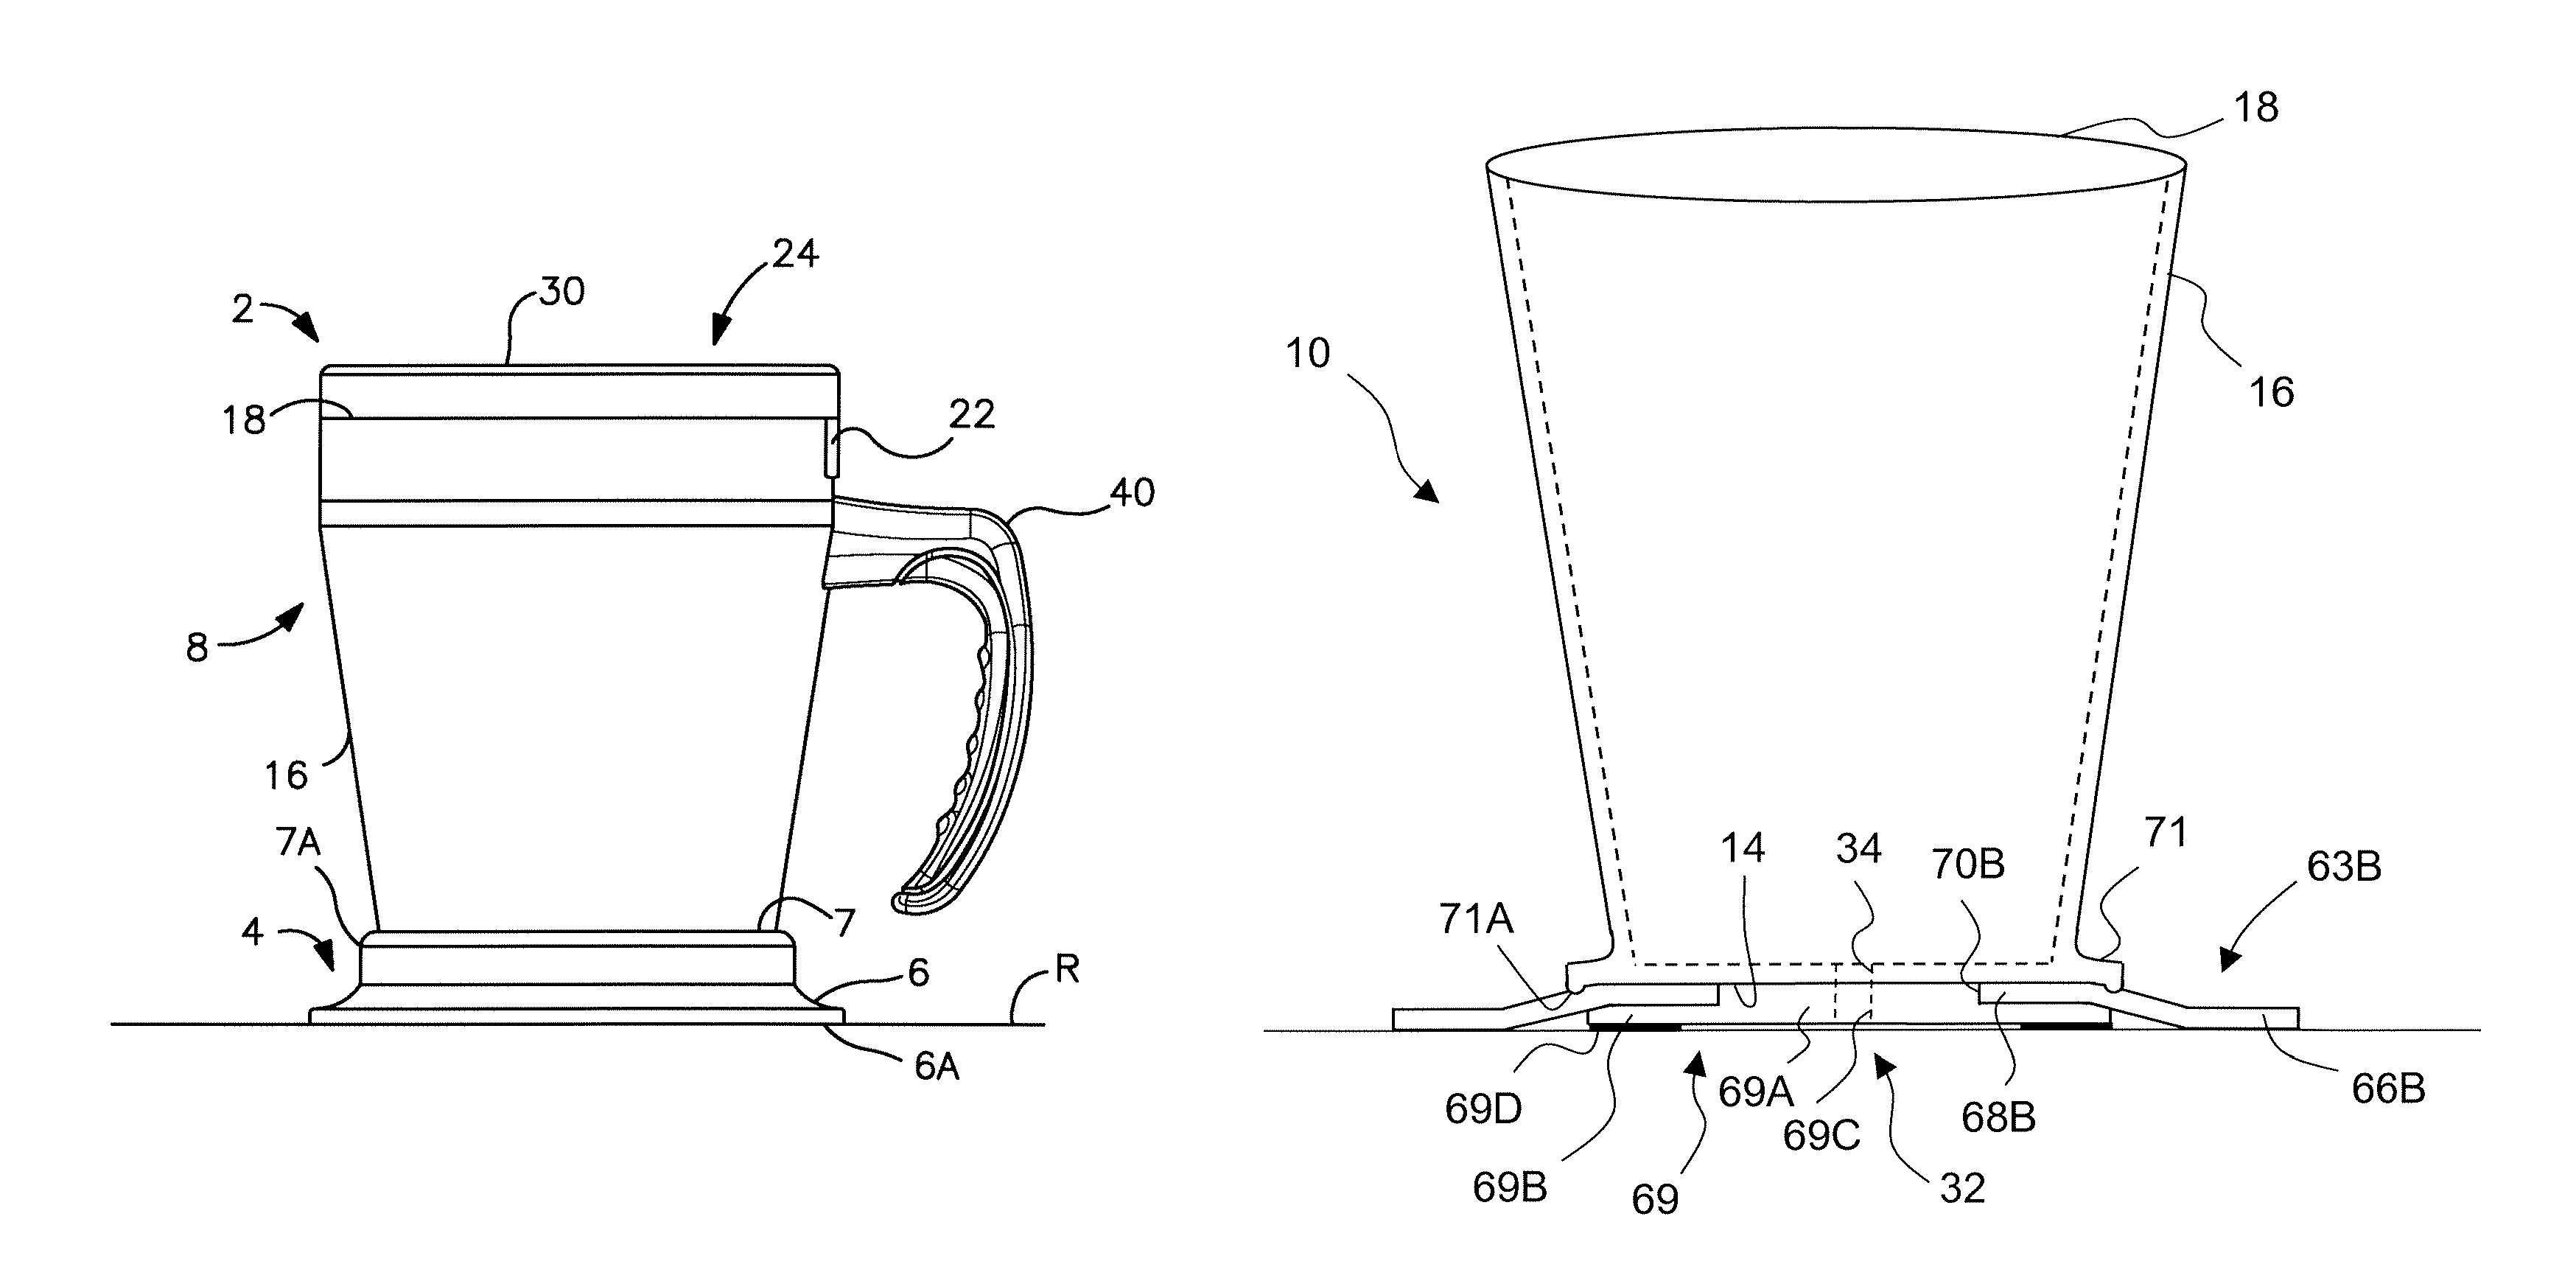 Self-anchoring beverage container with directional release and attachment capability